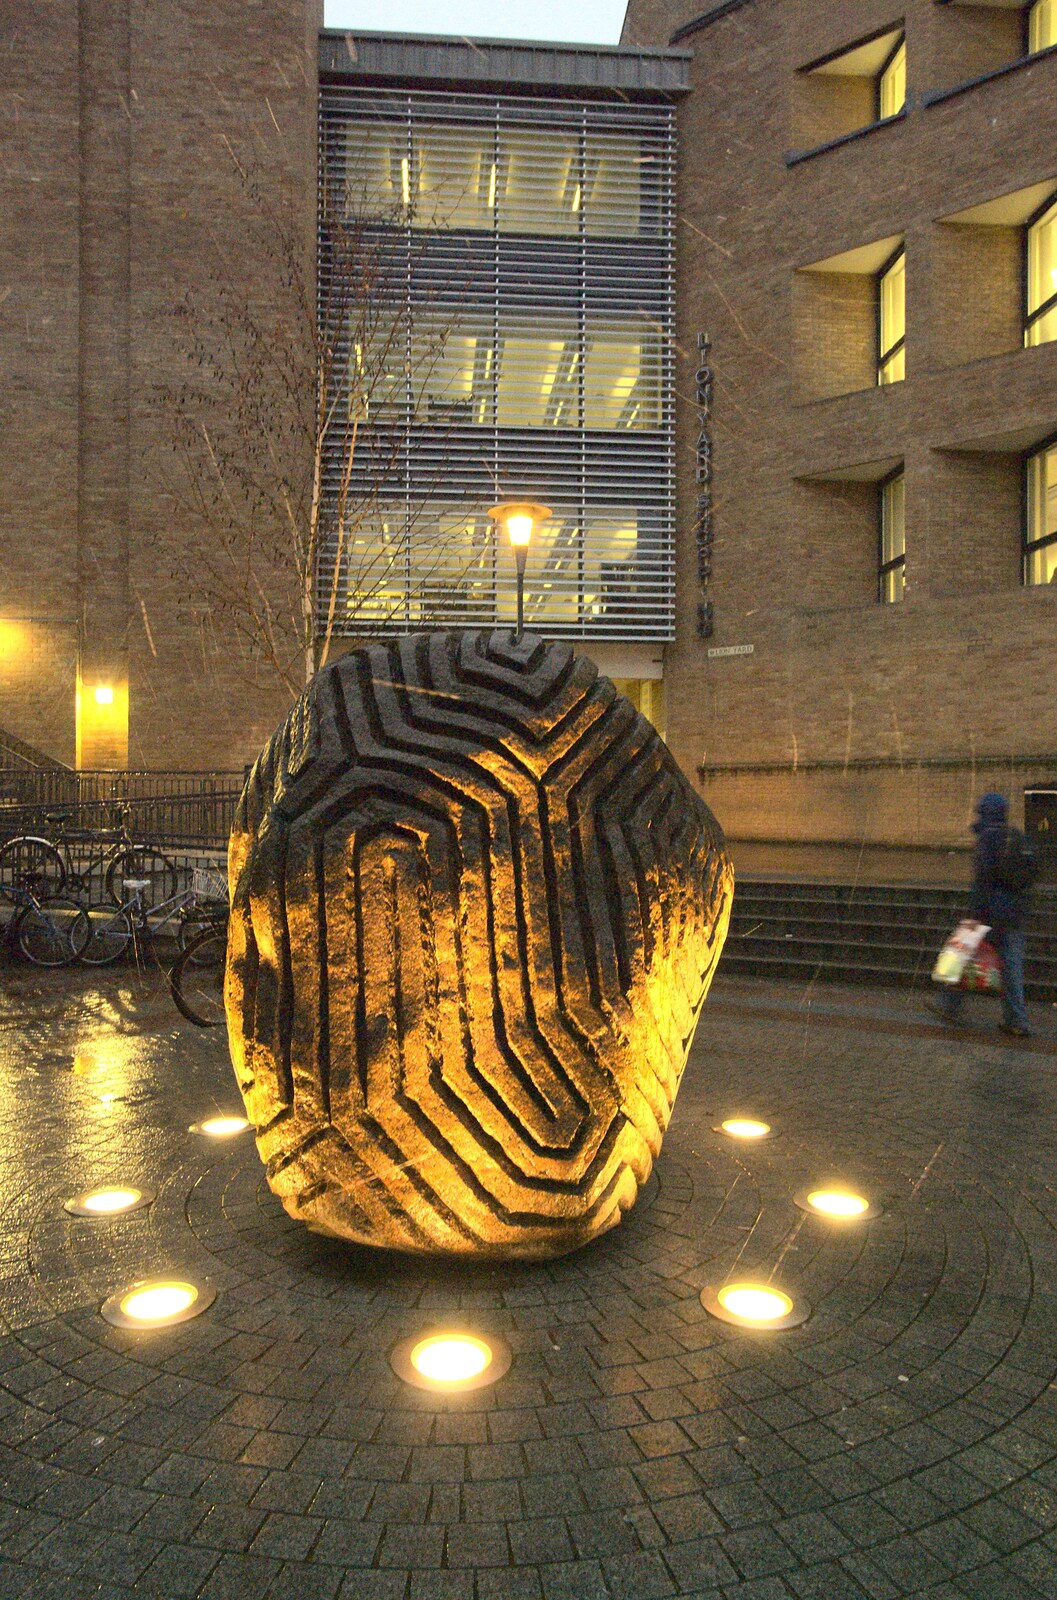 The stone blob sculpture by the car park from Qualcomm's Christmas Party and The End of Taptu, Cambridge - 16th December 2010